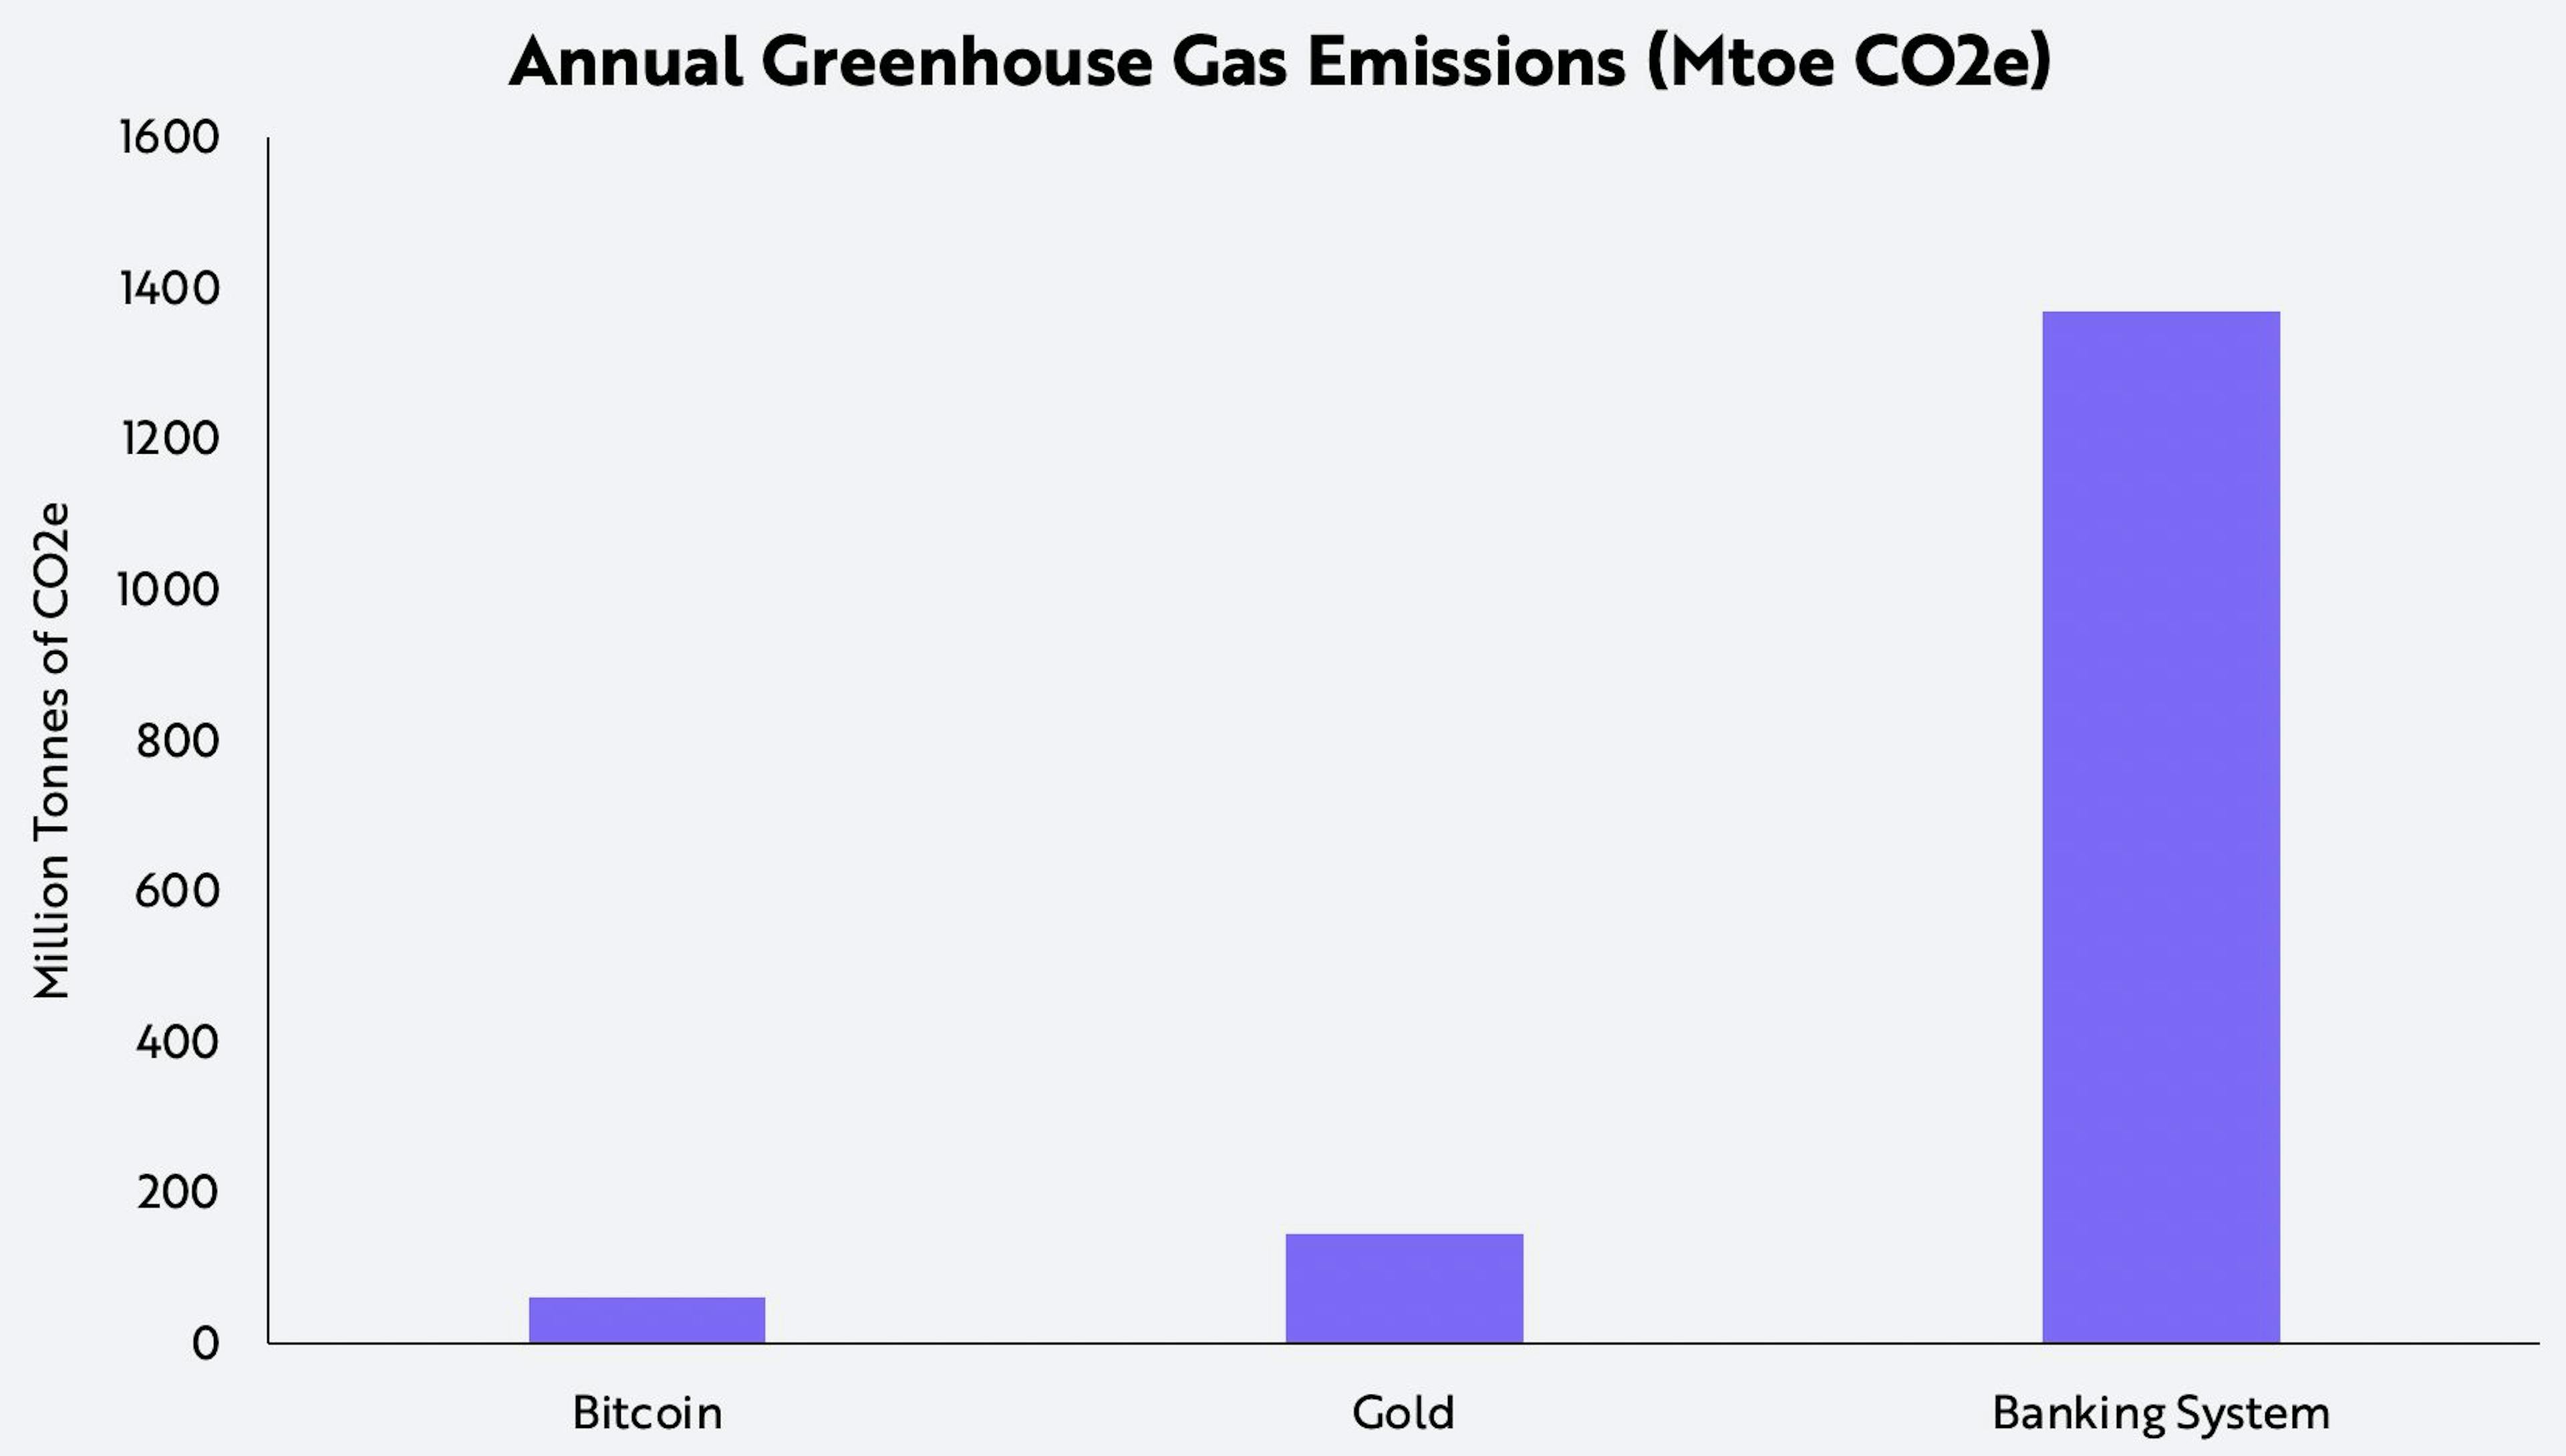 Annual Greenhouse Gas Emissions: ARK Investment